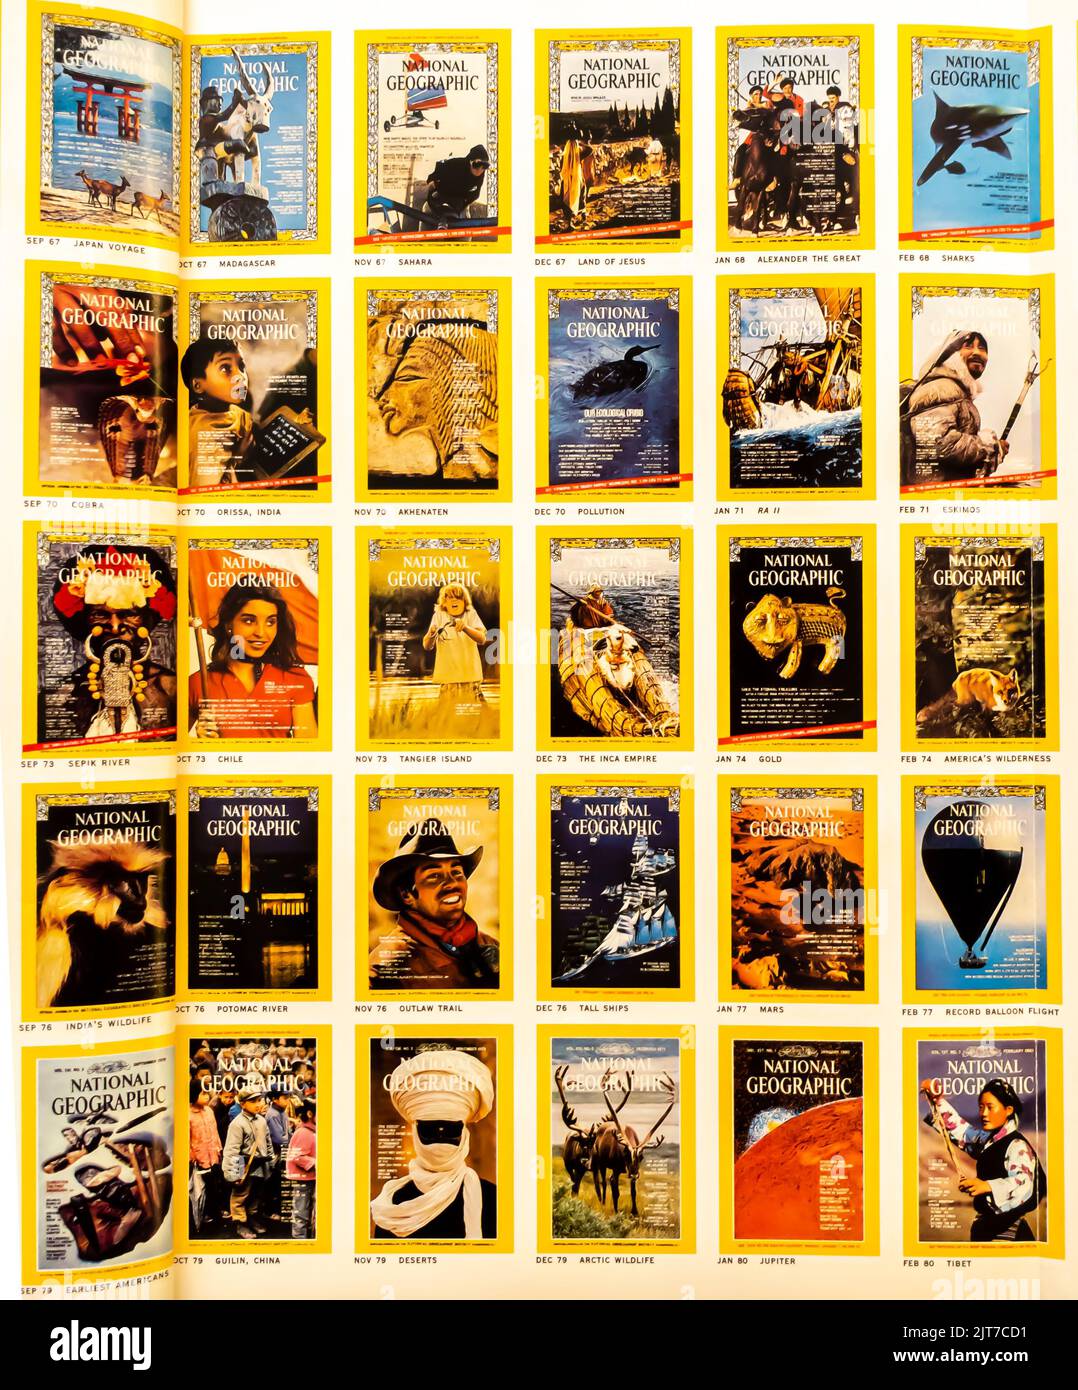 National Geographic magazines covers on a page in a NatGeo digest collecting all editions. 1967 - 1980 Stock Photo